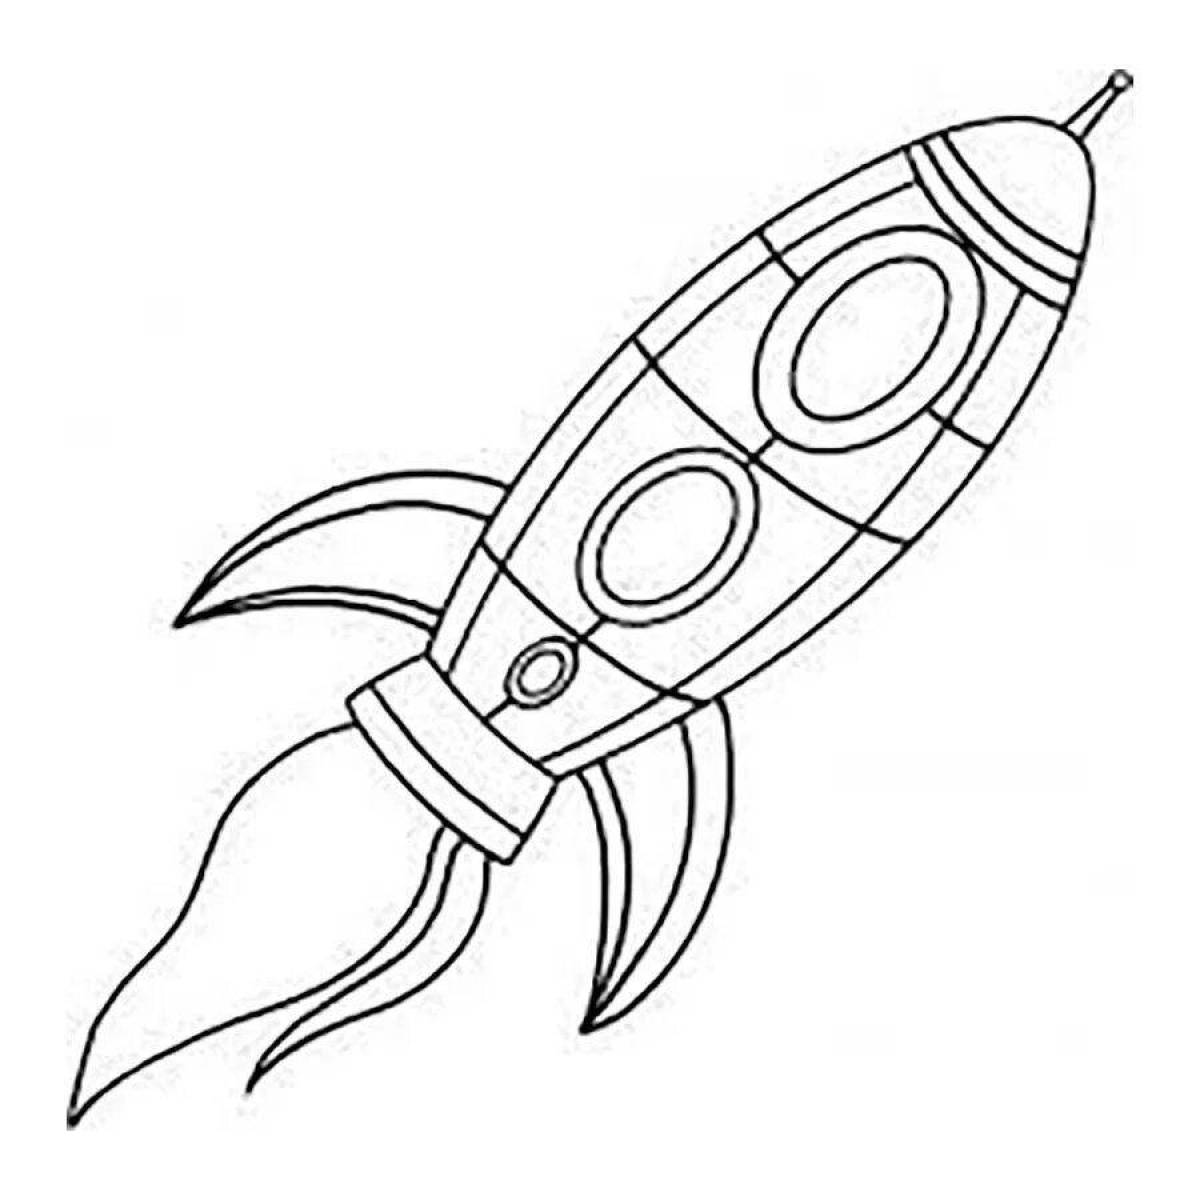 Dazzling space rocket coloring page